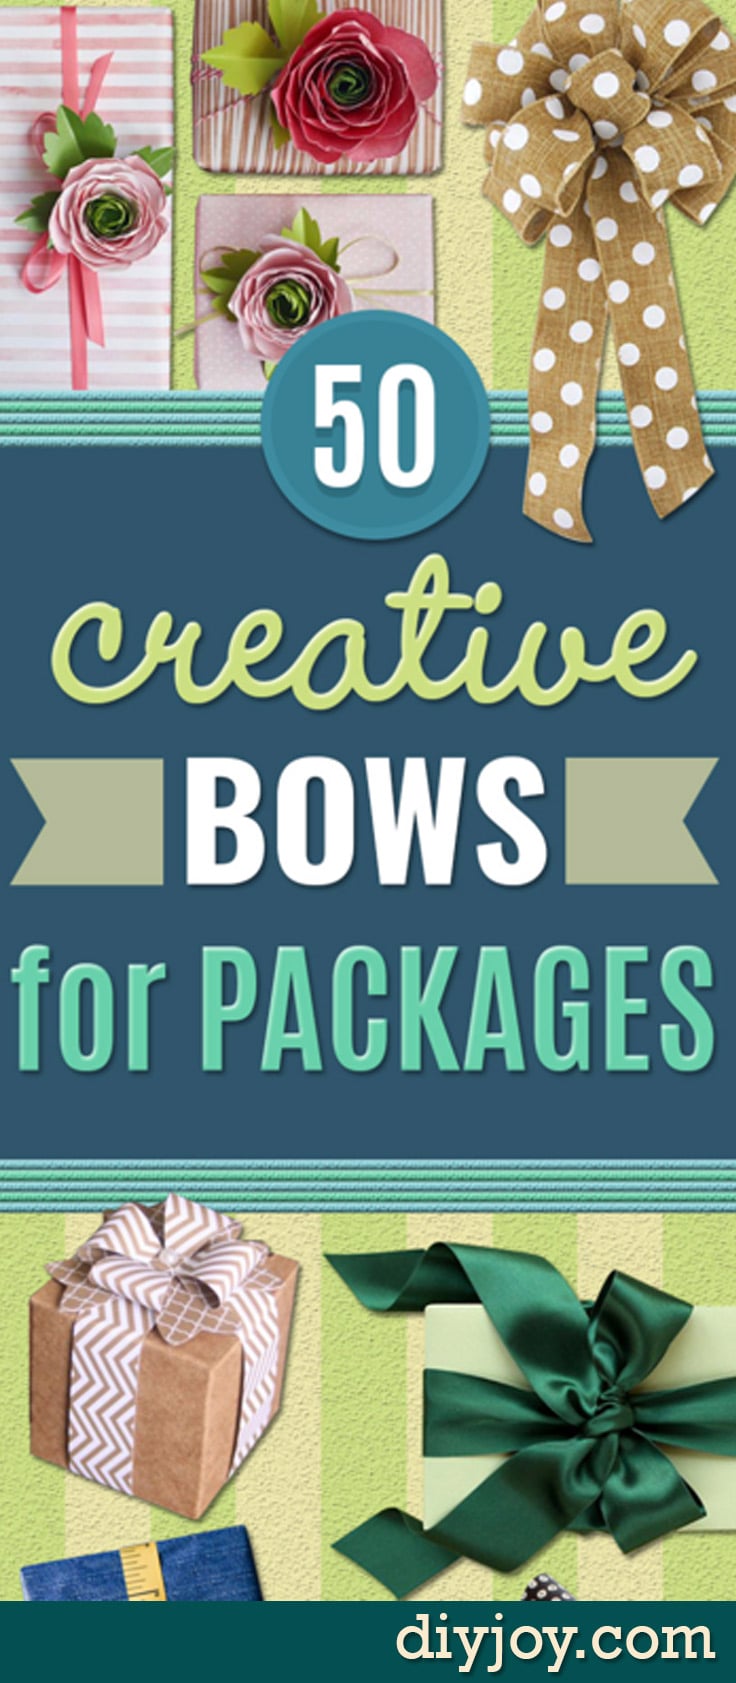 How to Make Bows for Packages - DIY Christmas Gift Wrapping Ideas